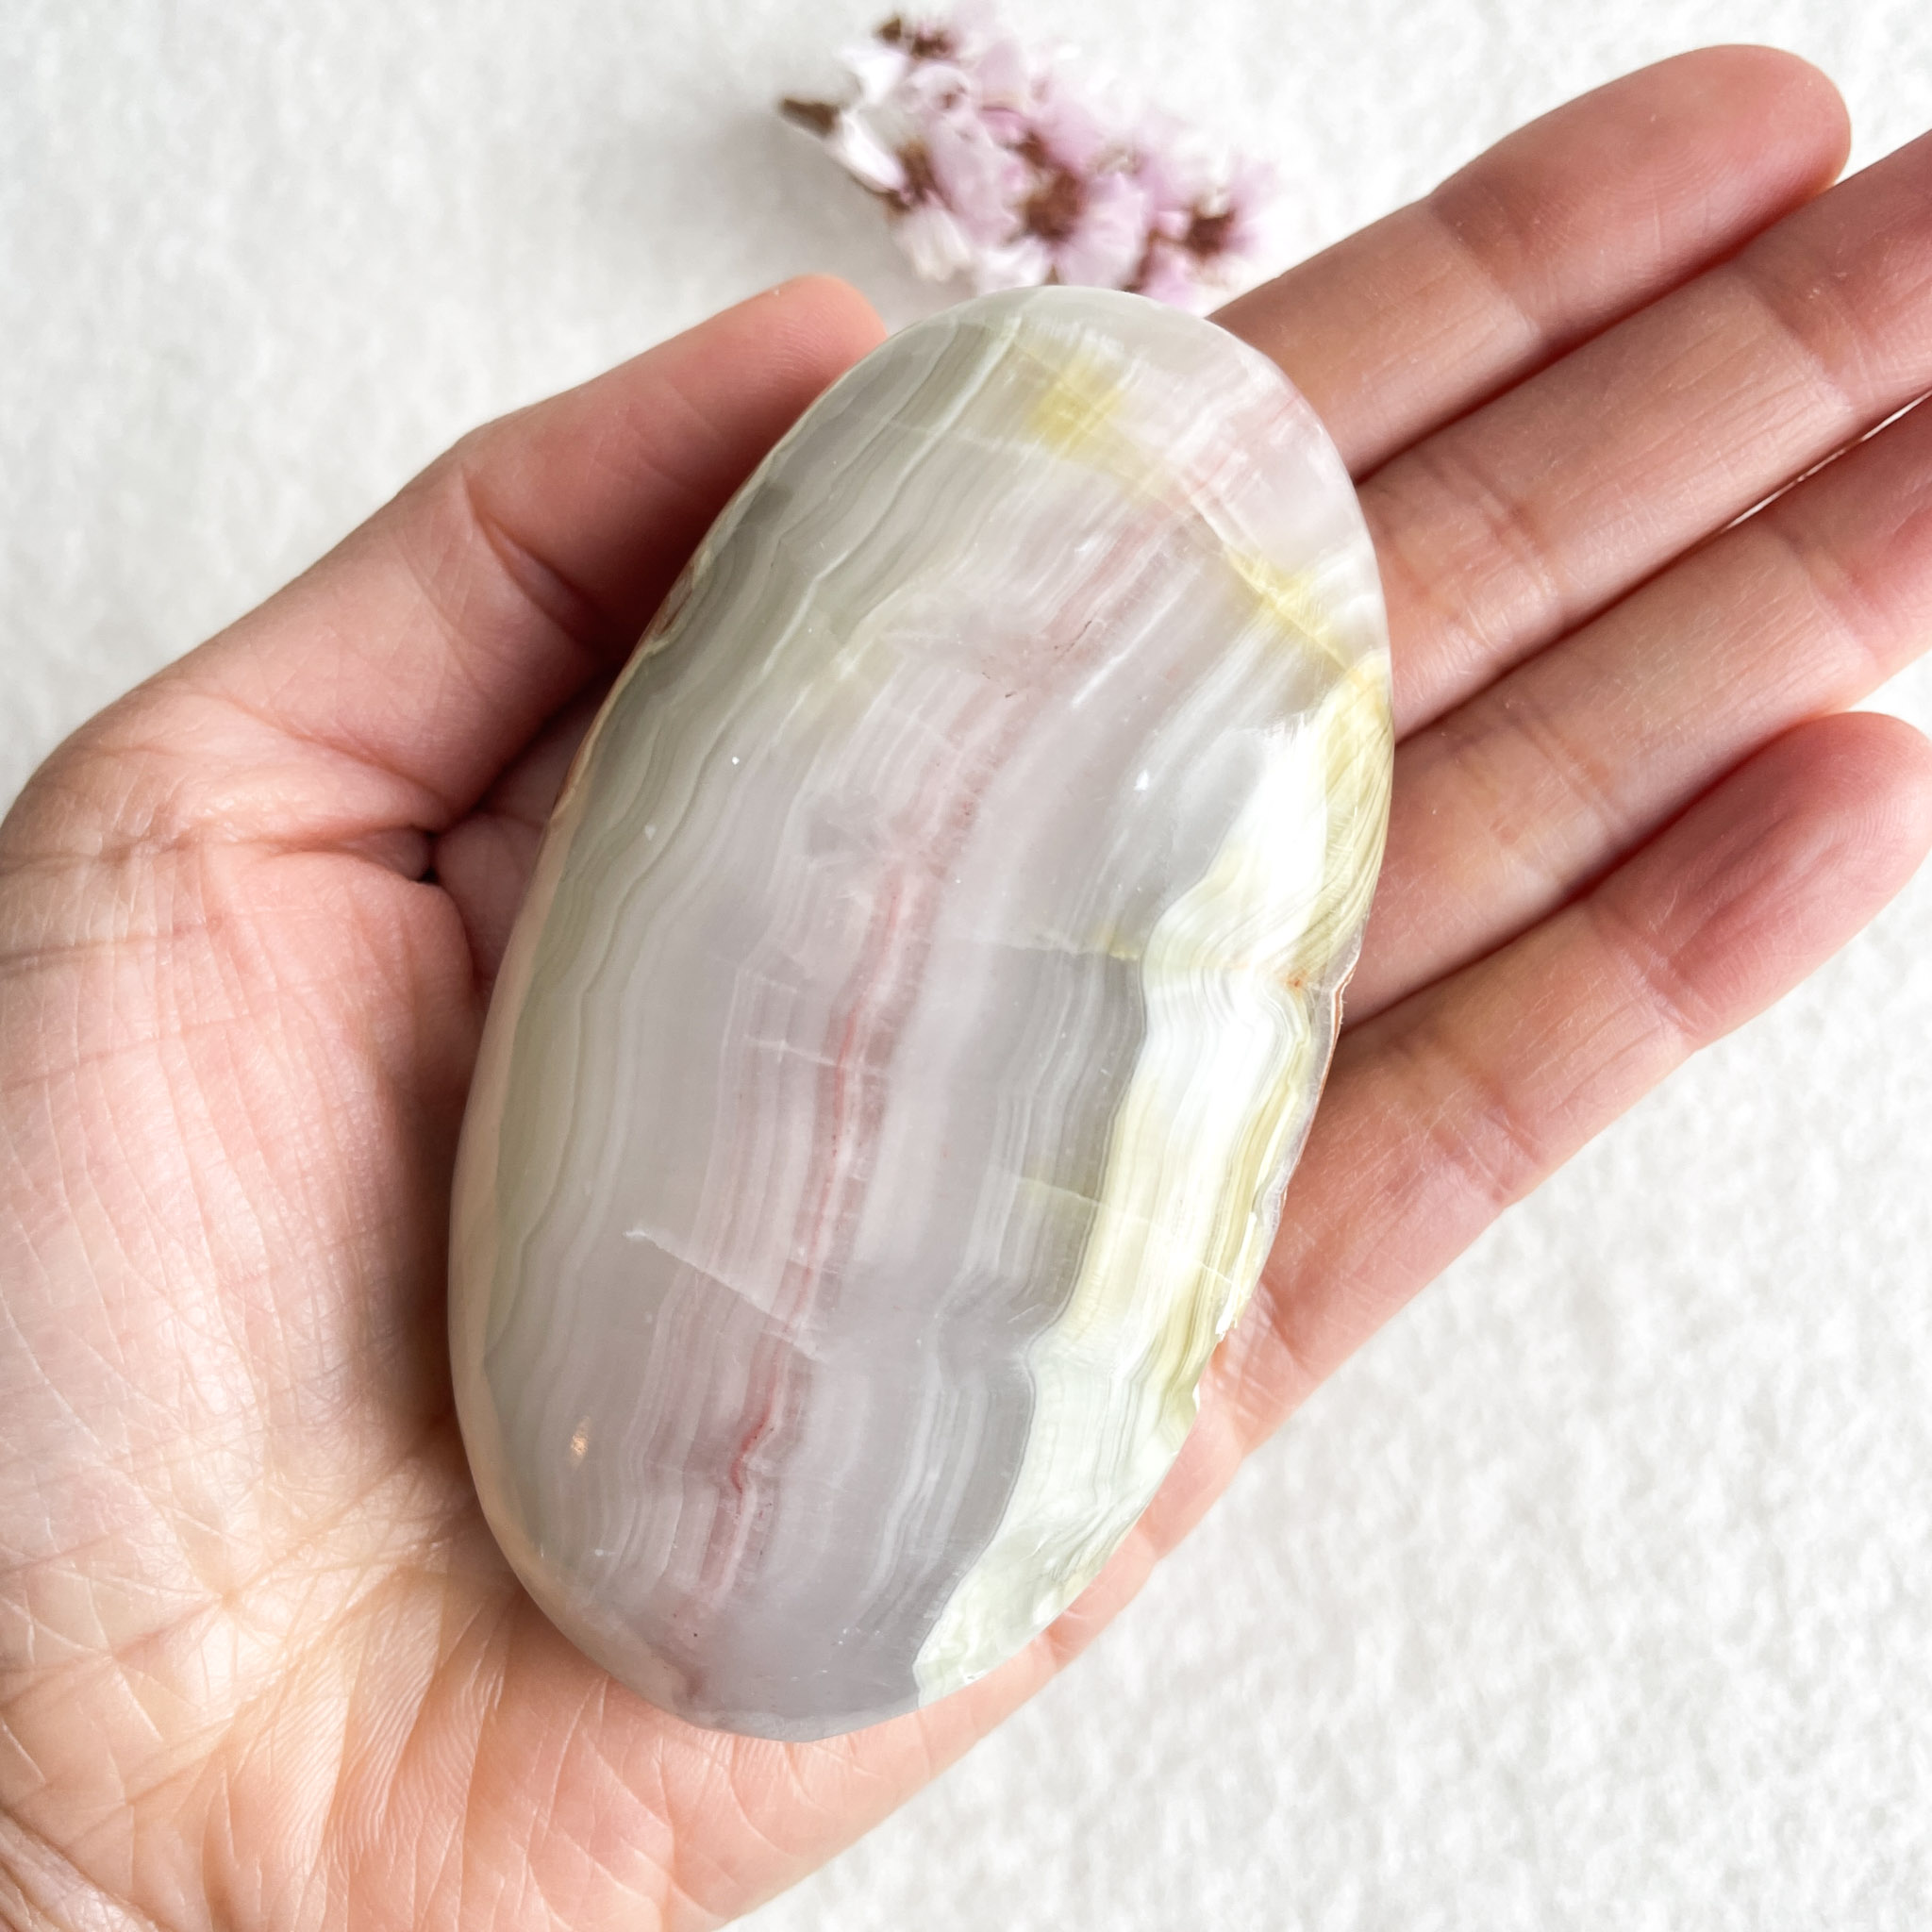 A hand holding a polished oval onyx stone with white, gray, and yellow banding patterns, against a white background with a blurred small pink flower in the corner.